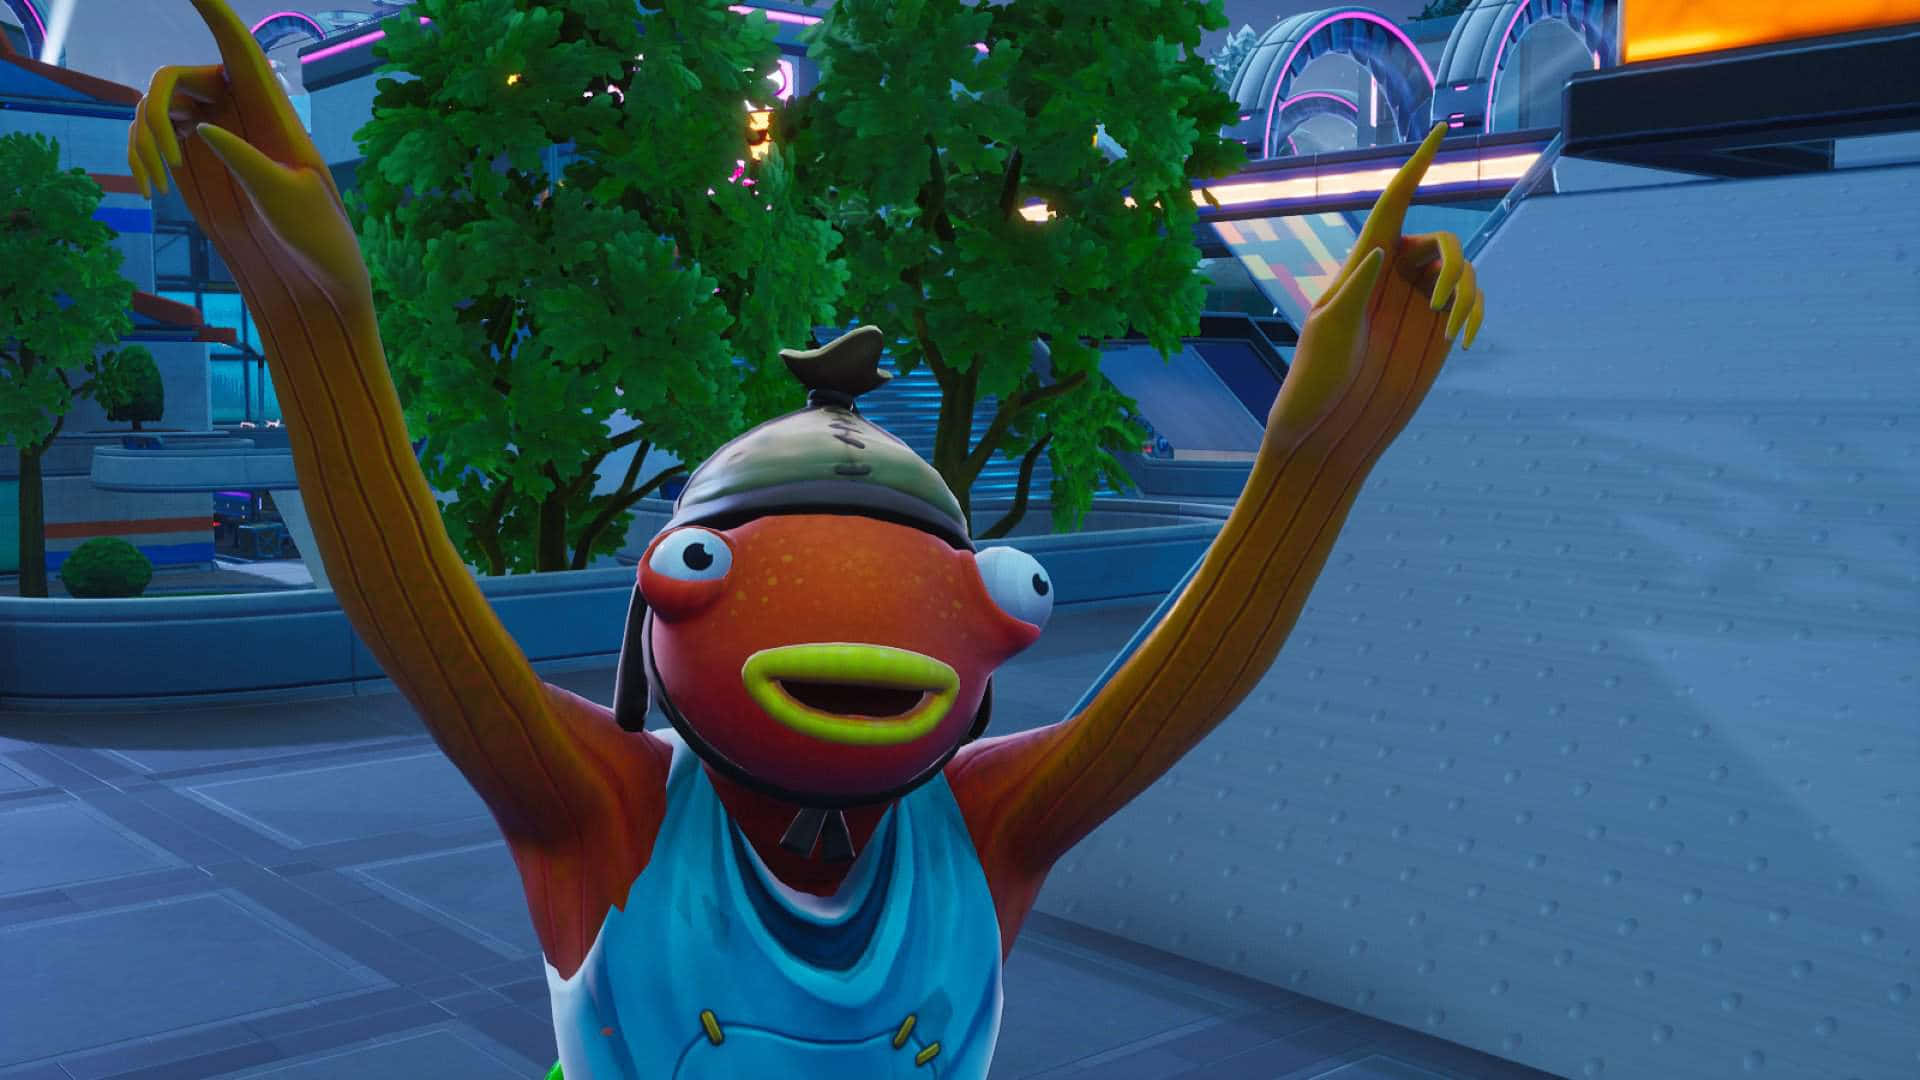 "Go forth and get a delicious feast with the ever popular Fortnite Fishstick outfit!" Wallpaper